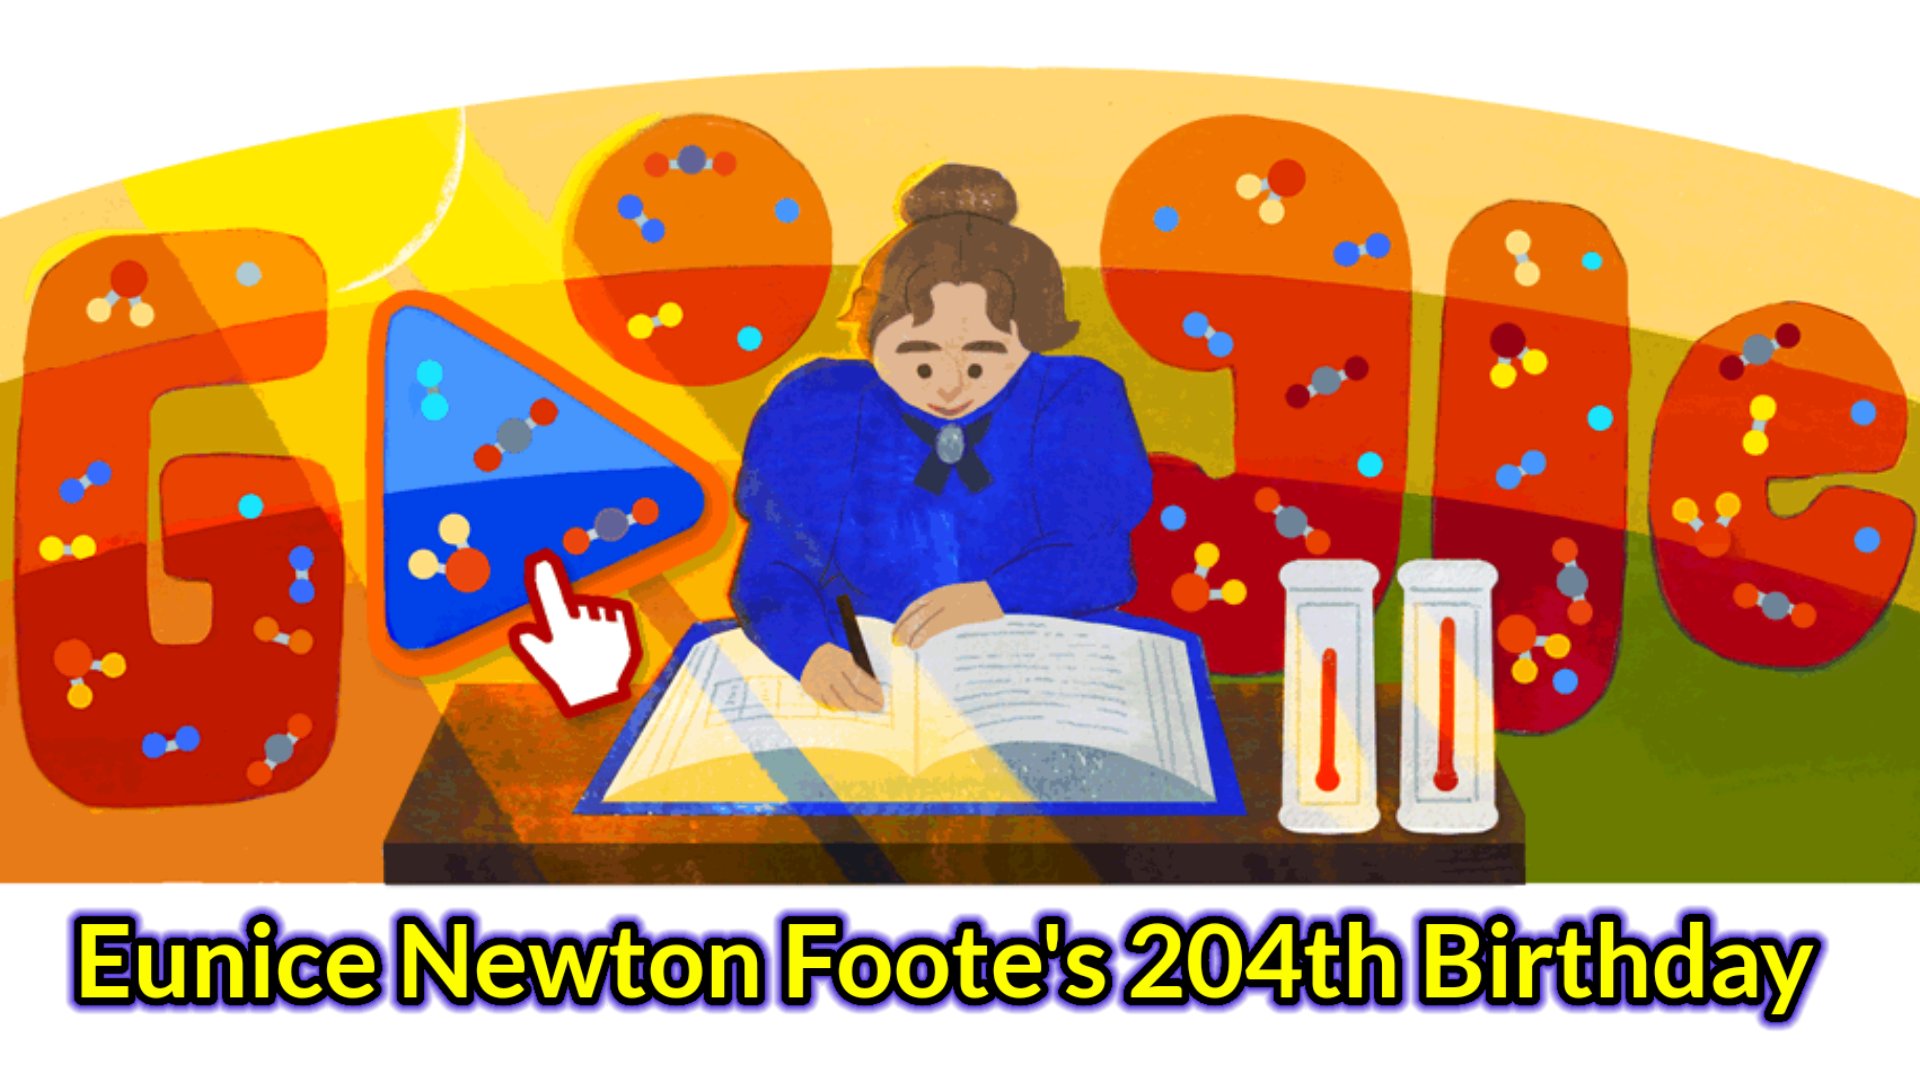 Eunice Newton Foote's: Today's Google Doodle Celebrates the 204th Birthday of the American scientist Eunice Newton Foote's